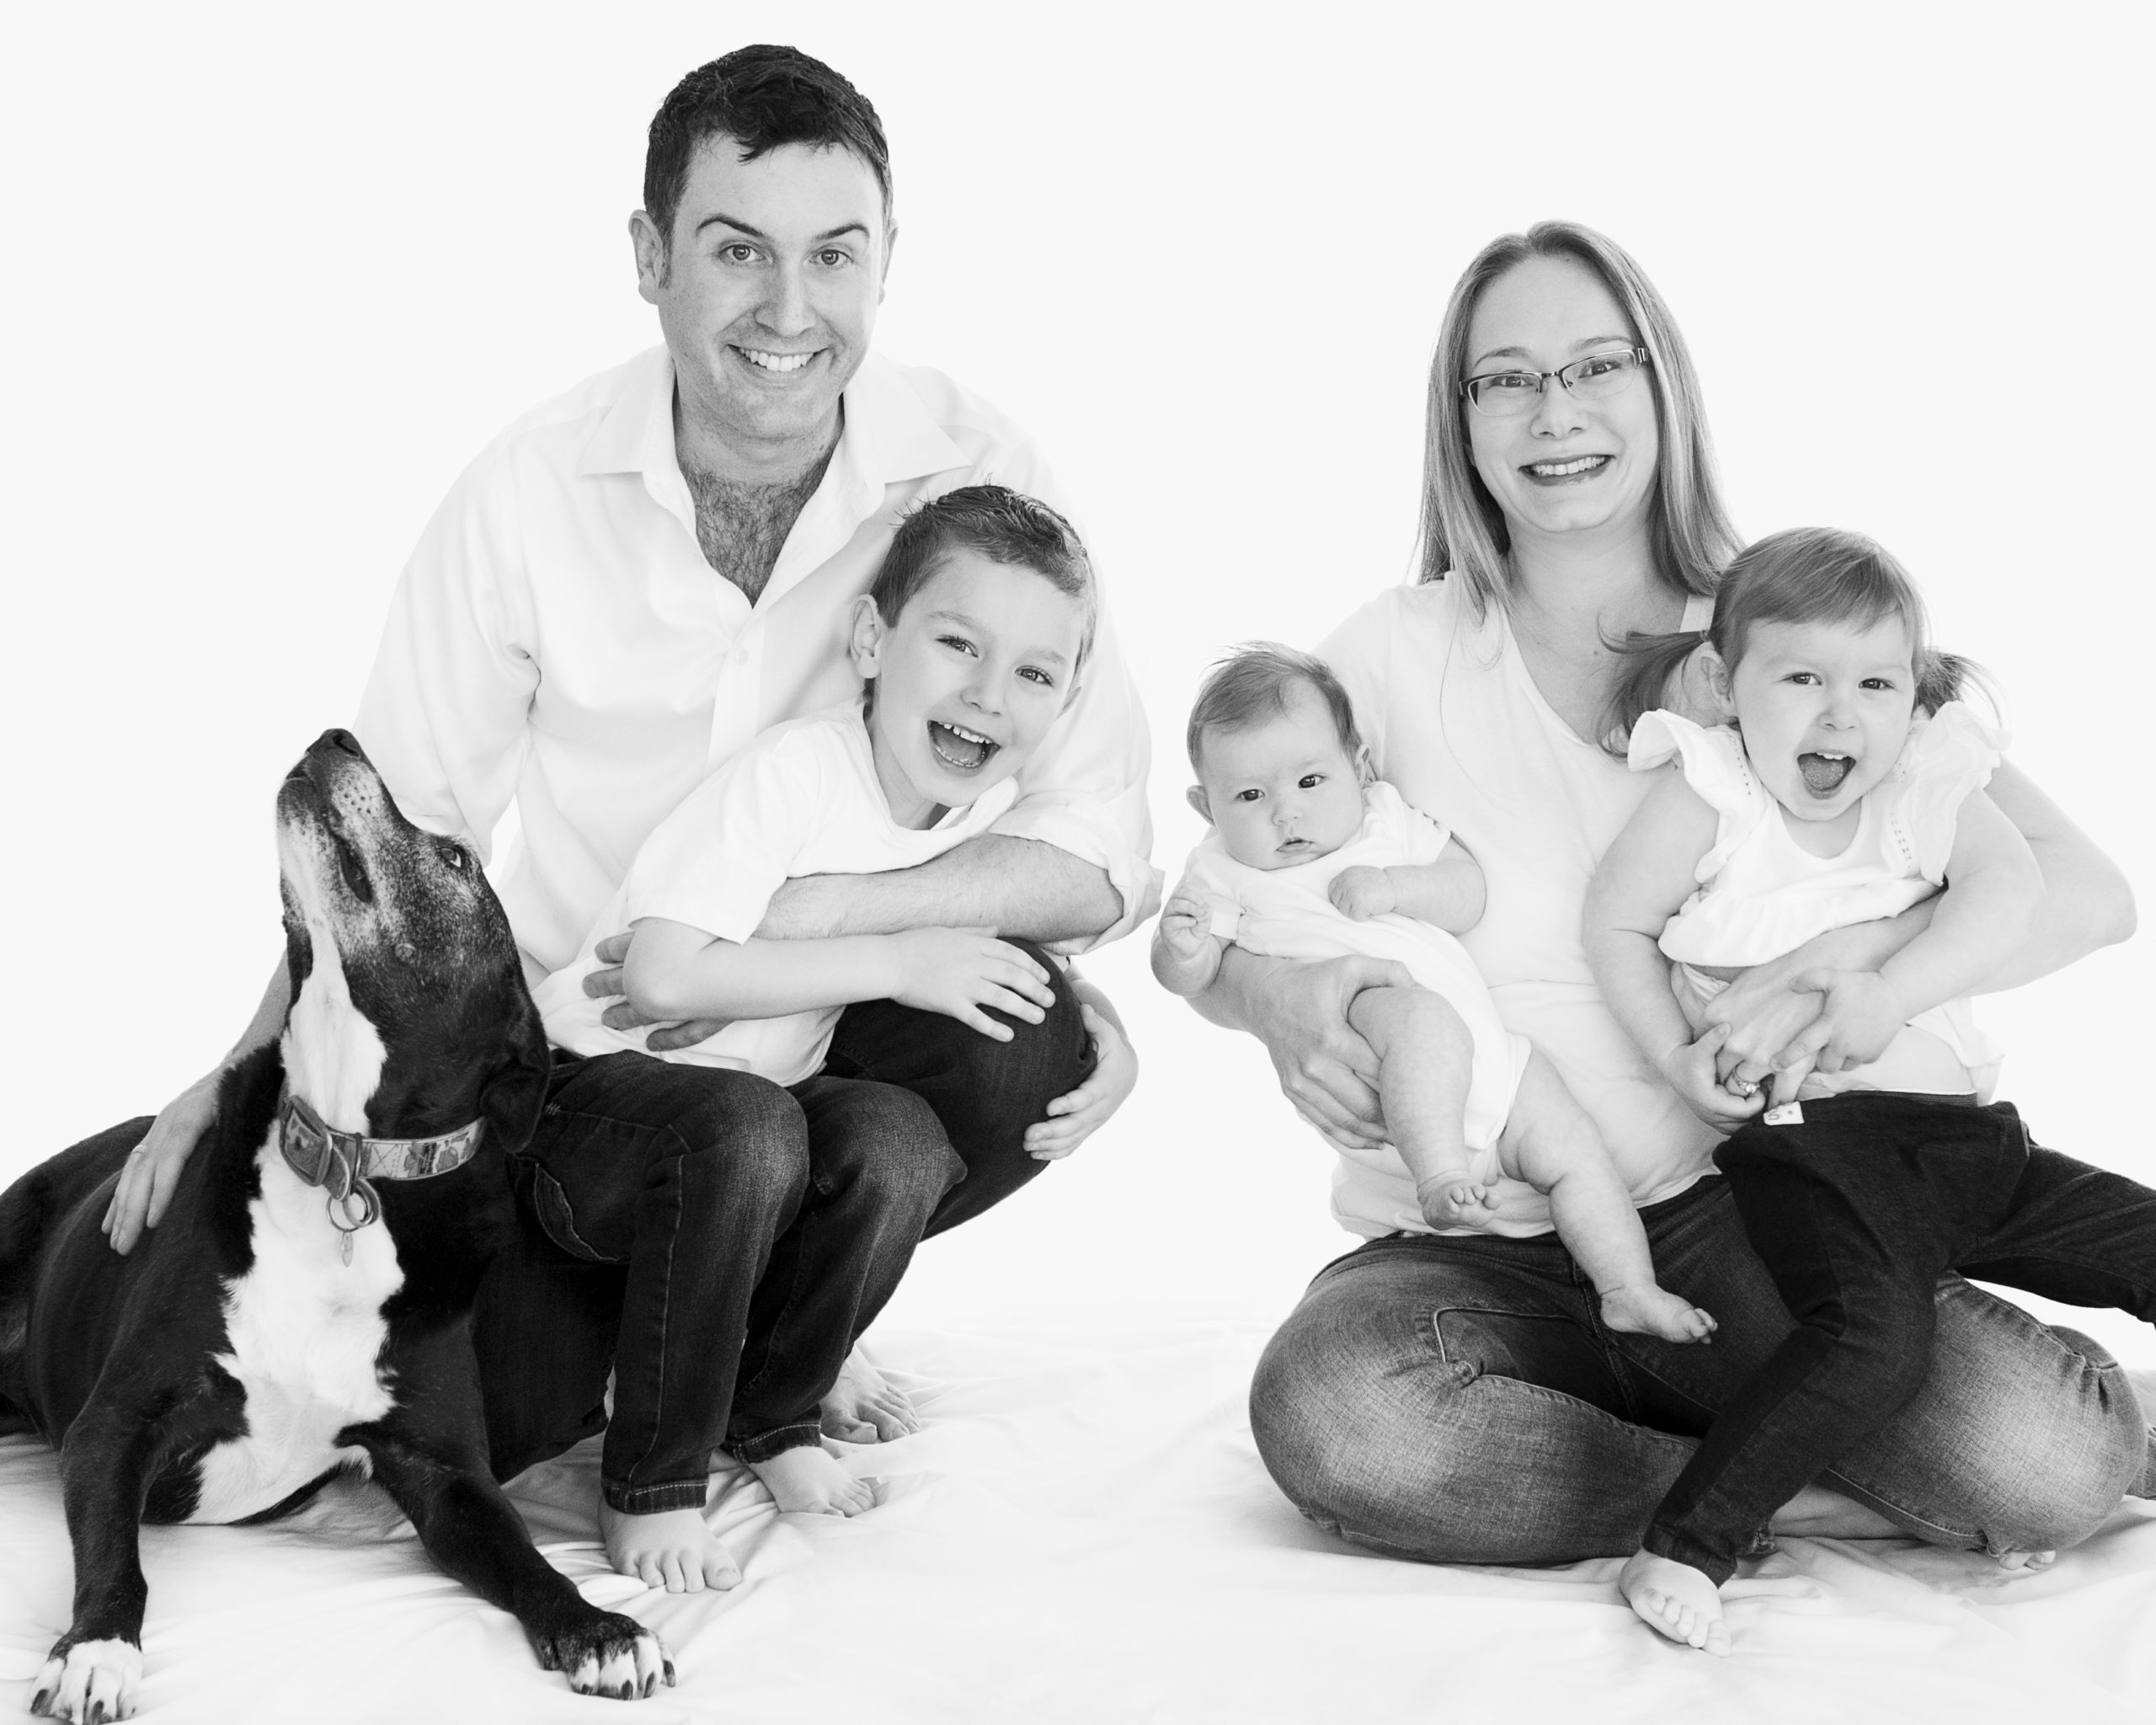 Are family portraits important?